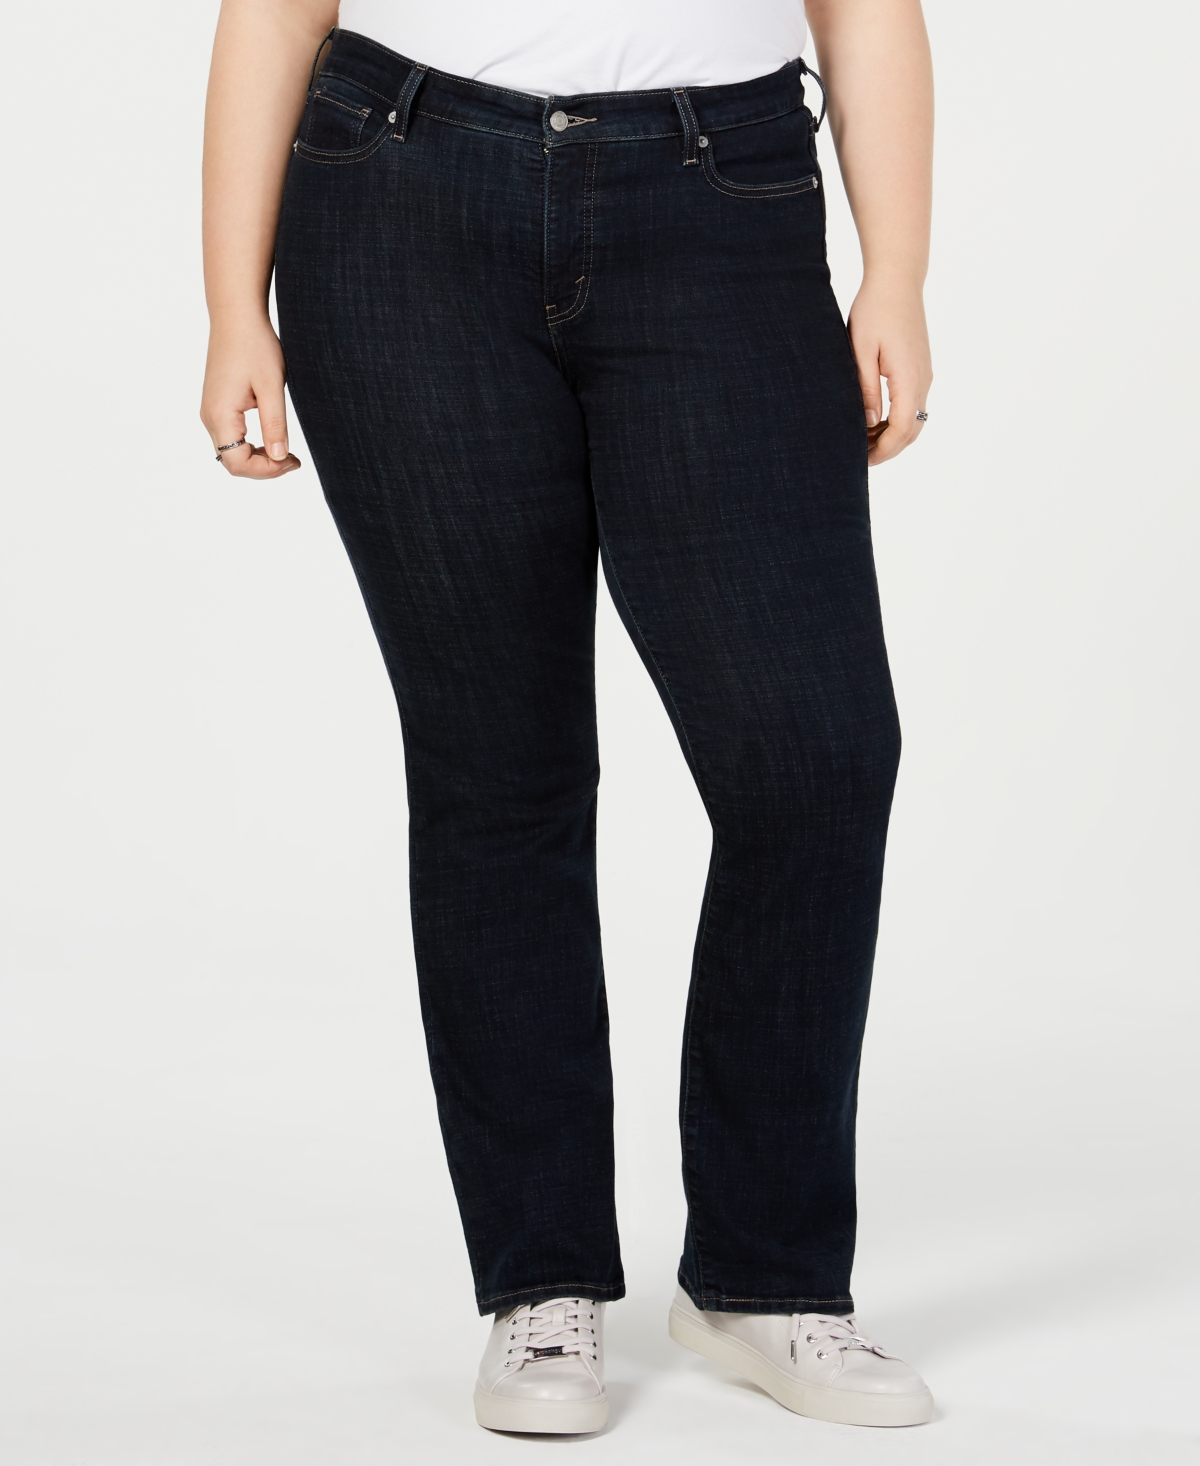 Levi's Trendy Plus Size 415 Classic Bootcut Jeans In Island Rinse